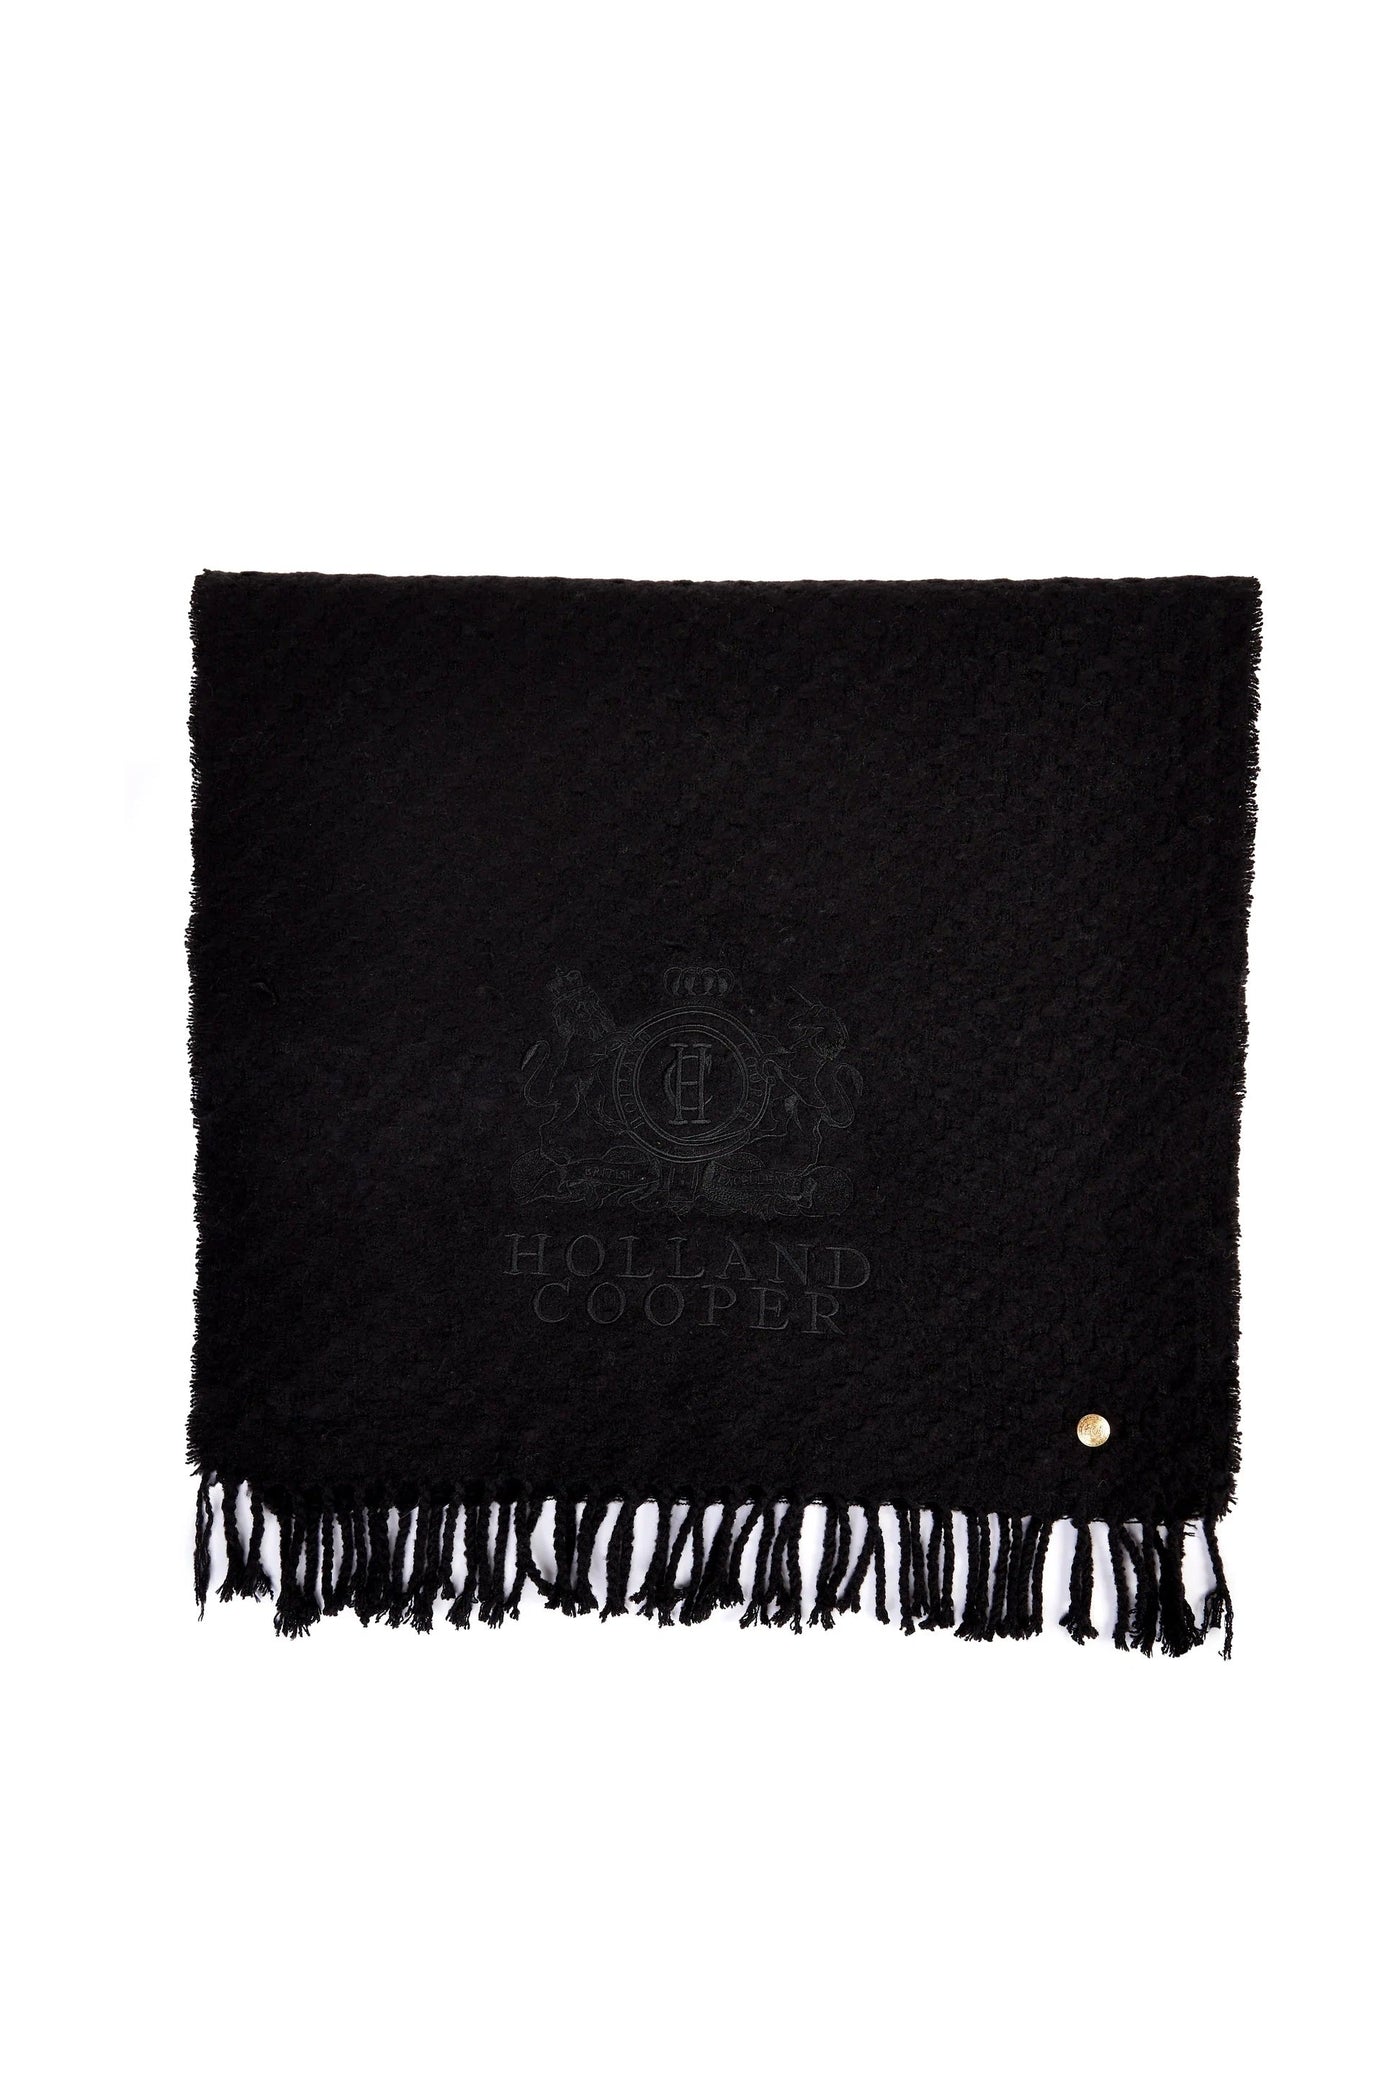 Holland Cooper Chelsea Scarf in Black